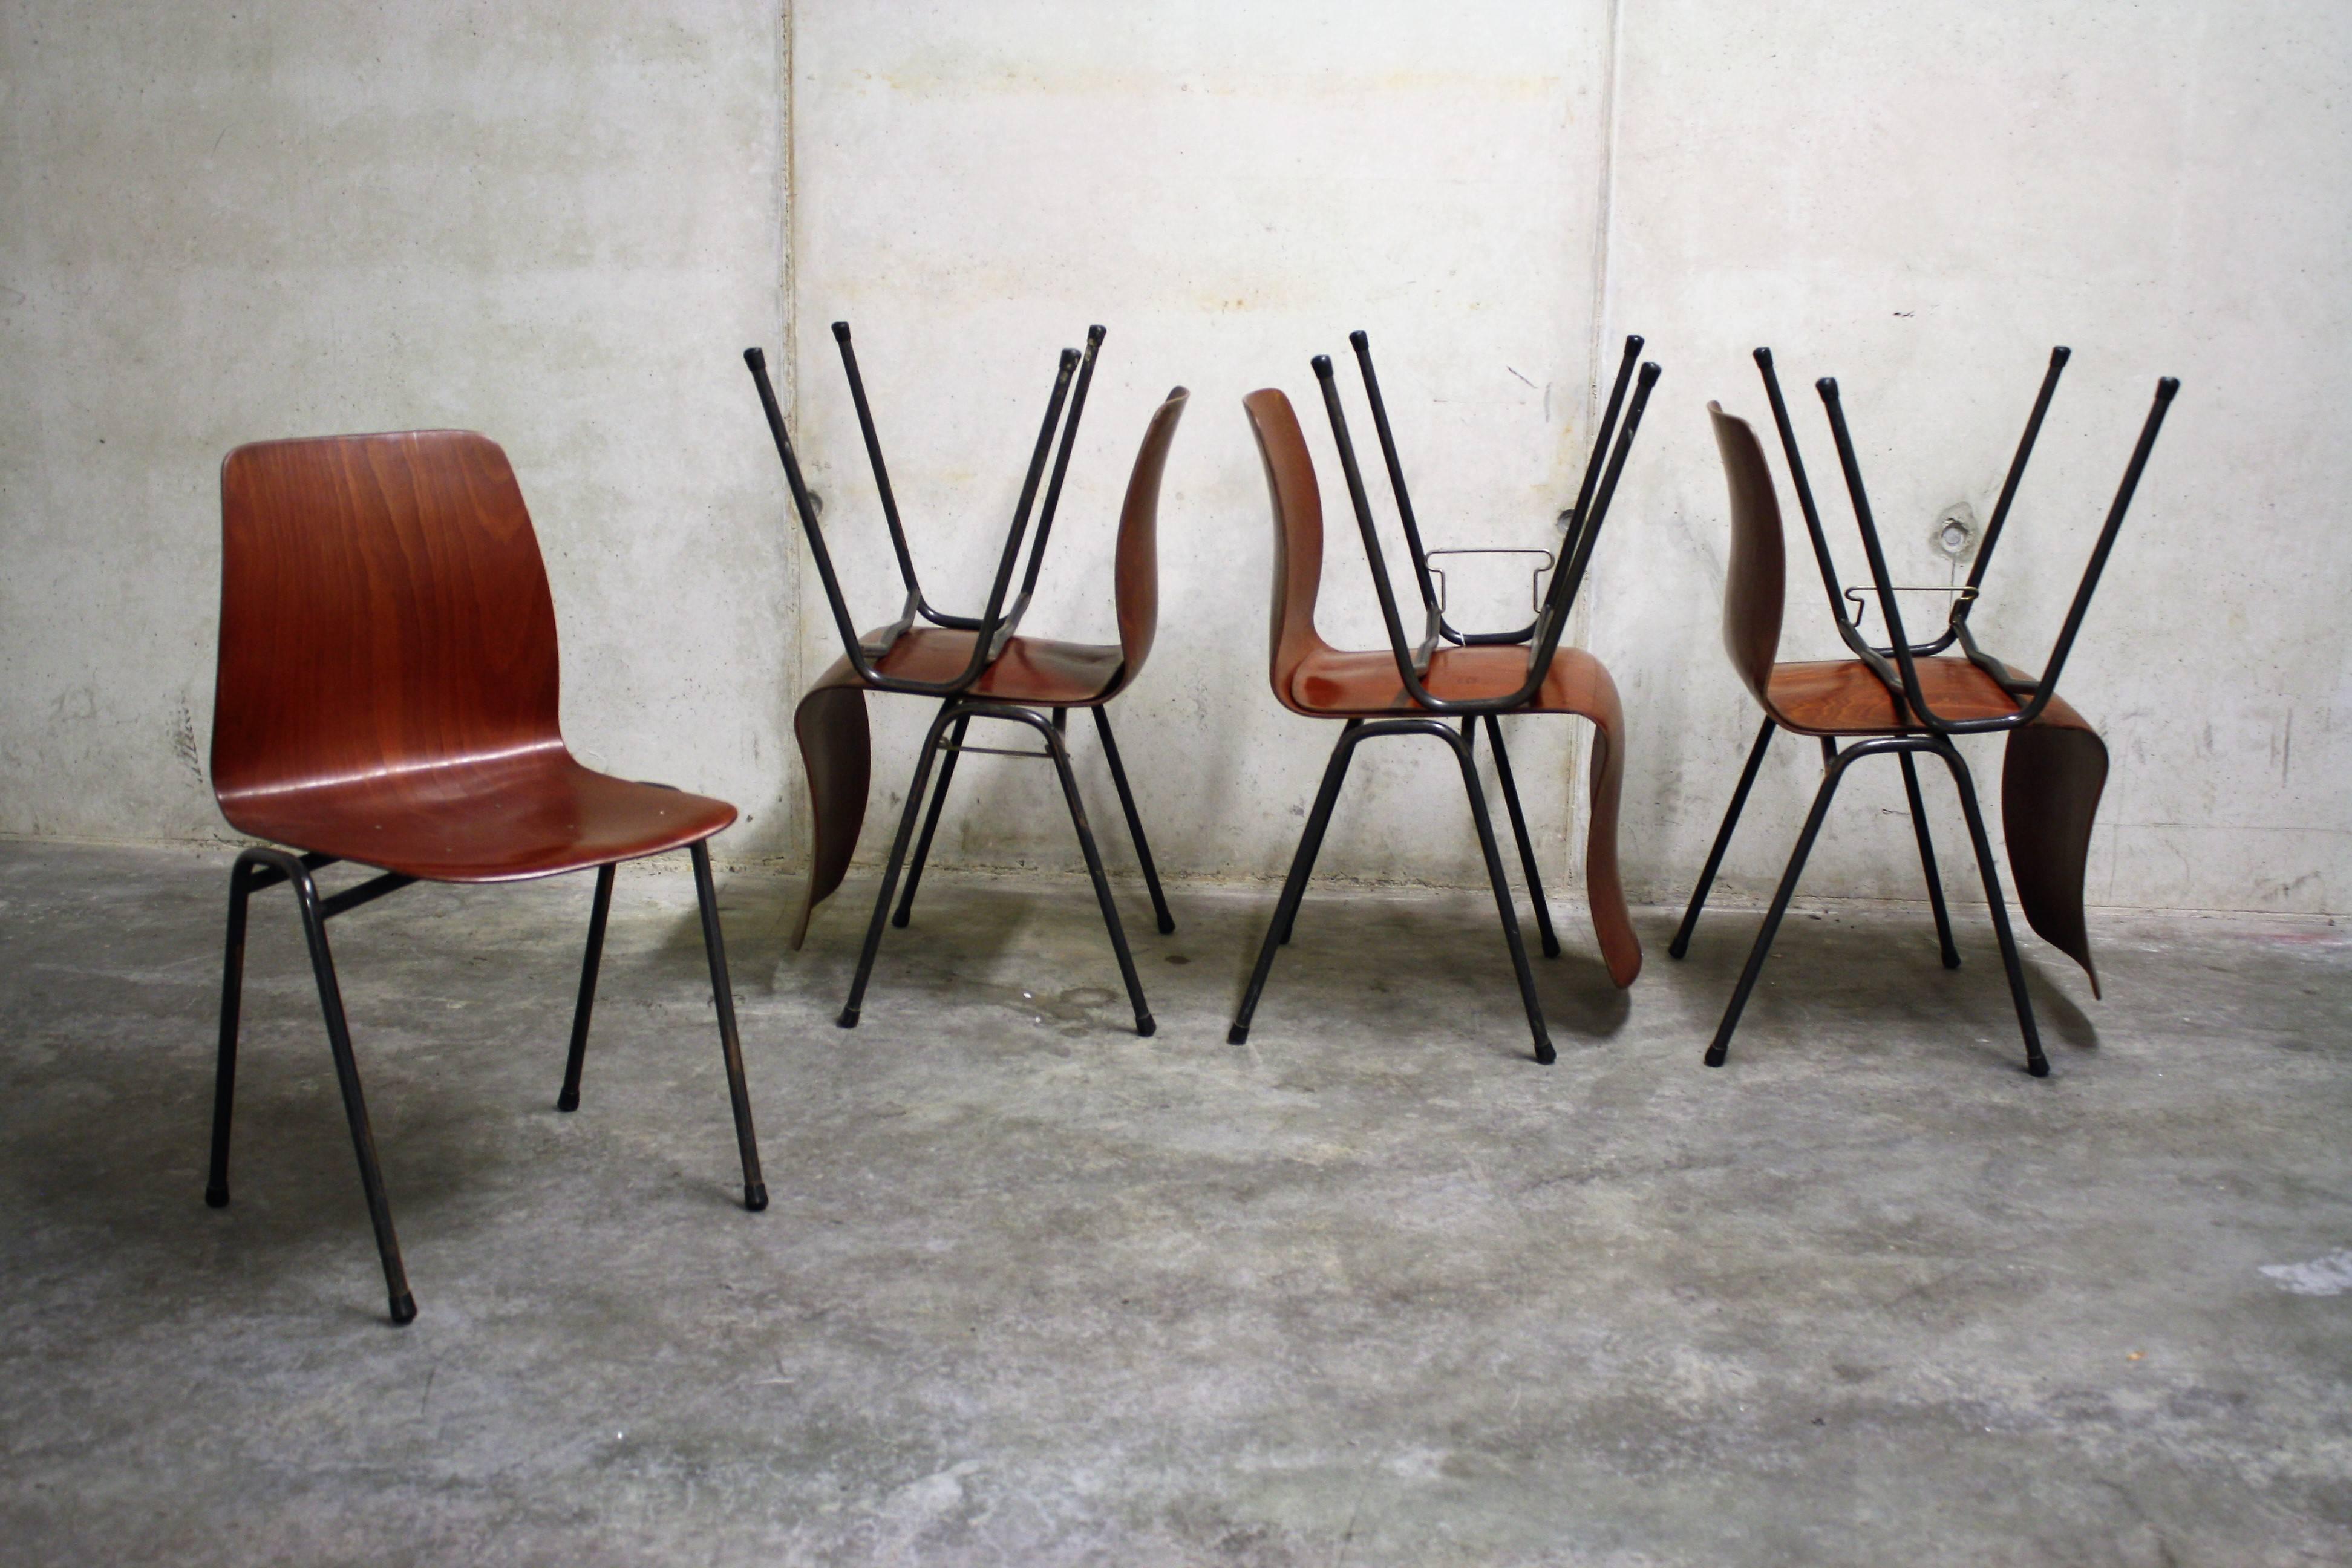 Vintage stackable Pagholz chairs by Galvanitas.

This set of seven (six in very good condition) vintage Pagholz chairs where commonly used in schools.

The rosewood seats are mounted on a black lackered metal frame.

All chairs are stamped on